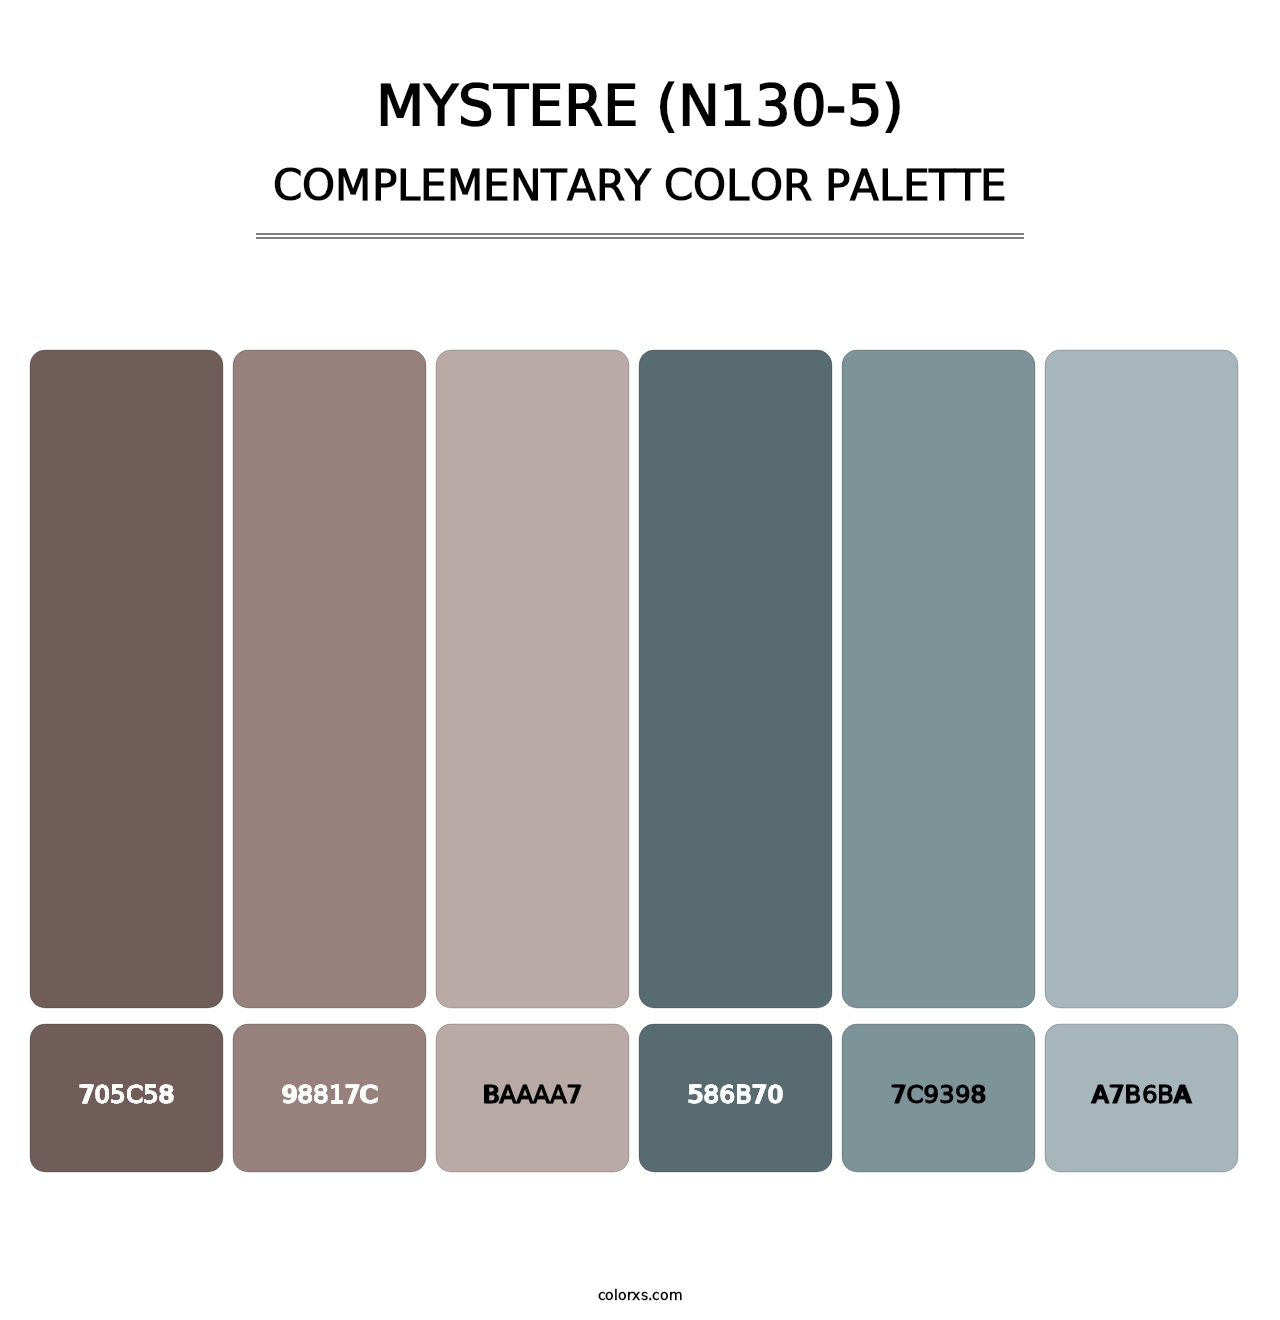 Mystere (N130-5) - Complementary Color Palette